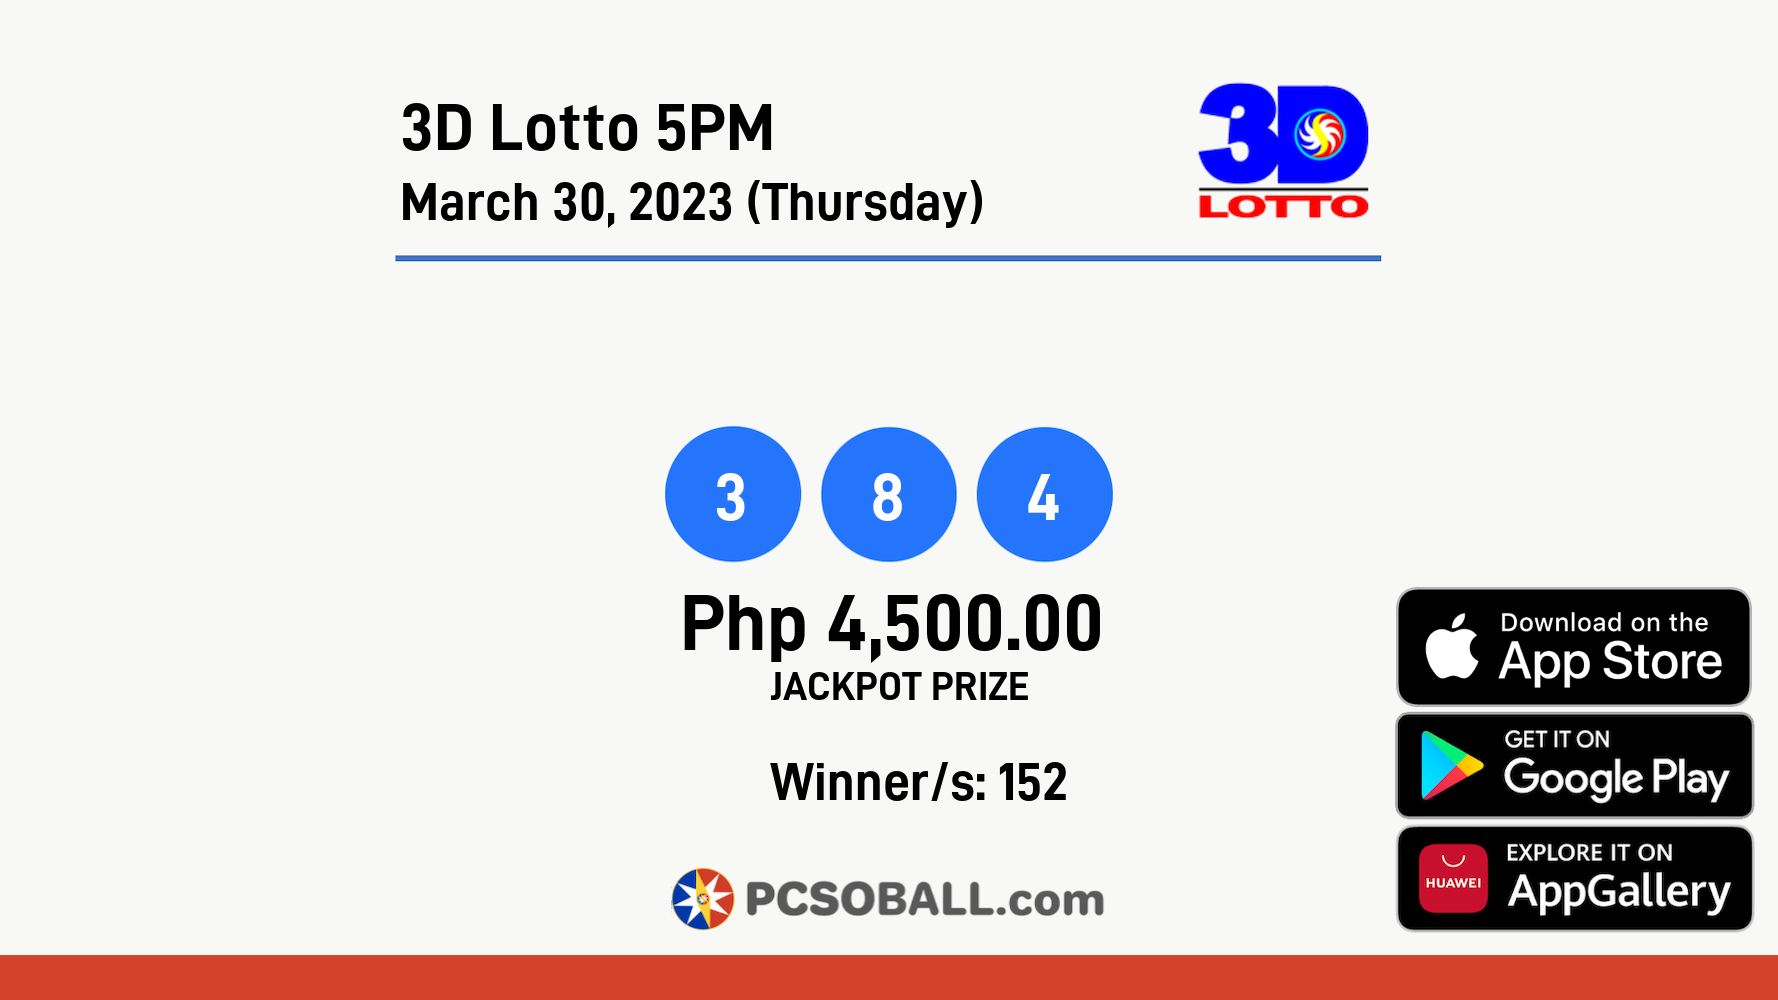 3D Lotto 5PM March 30, 2023 (Thursday) Result